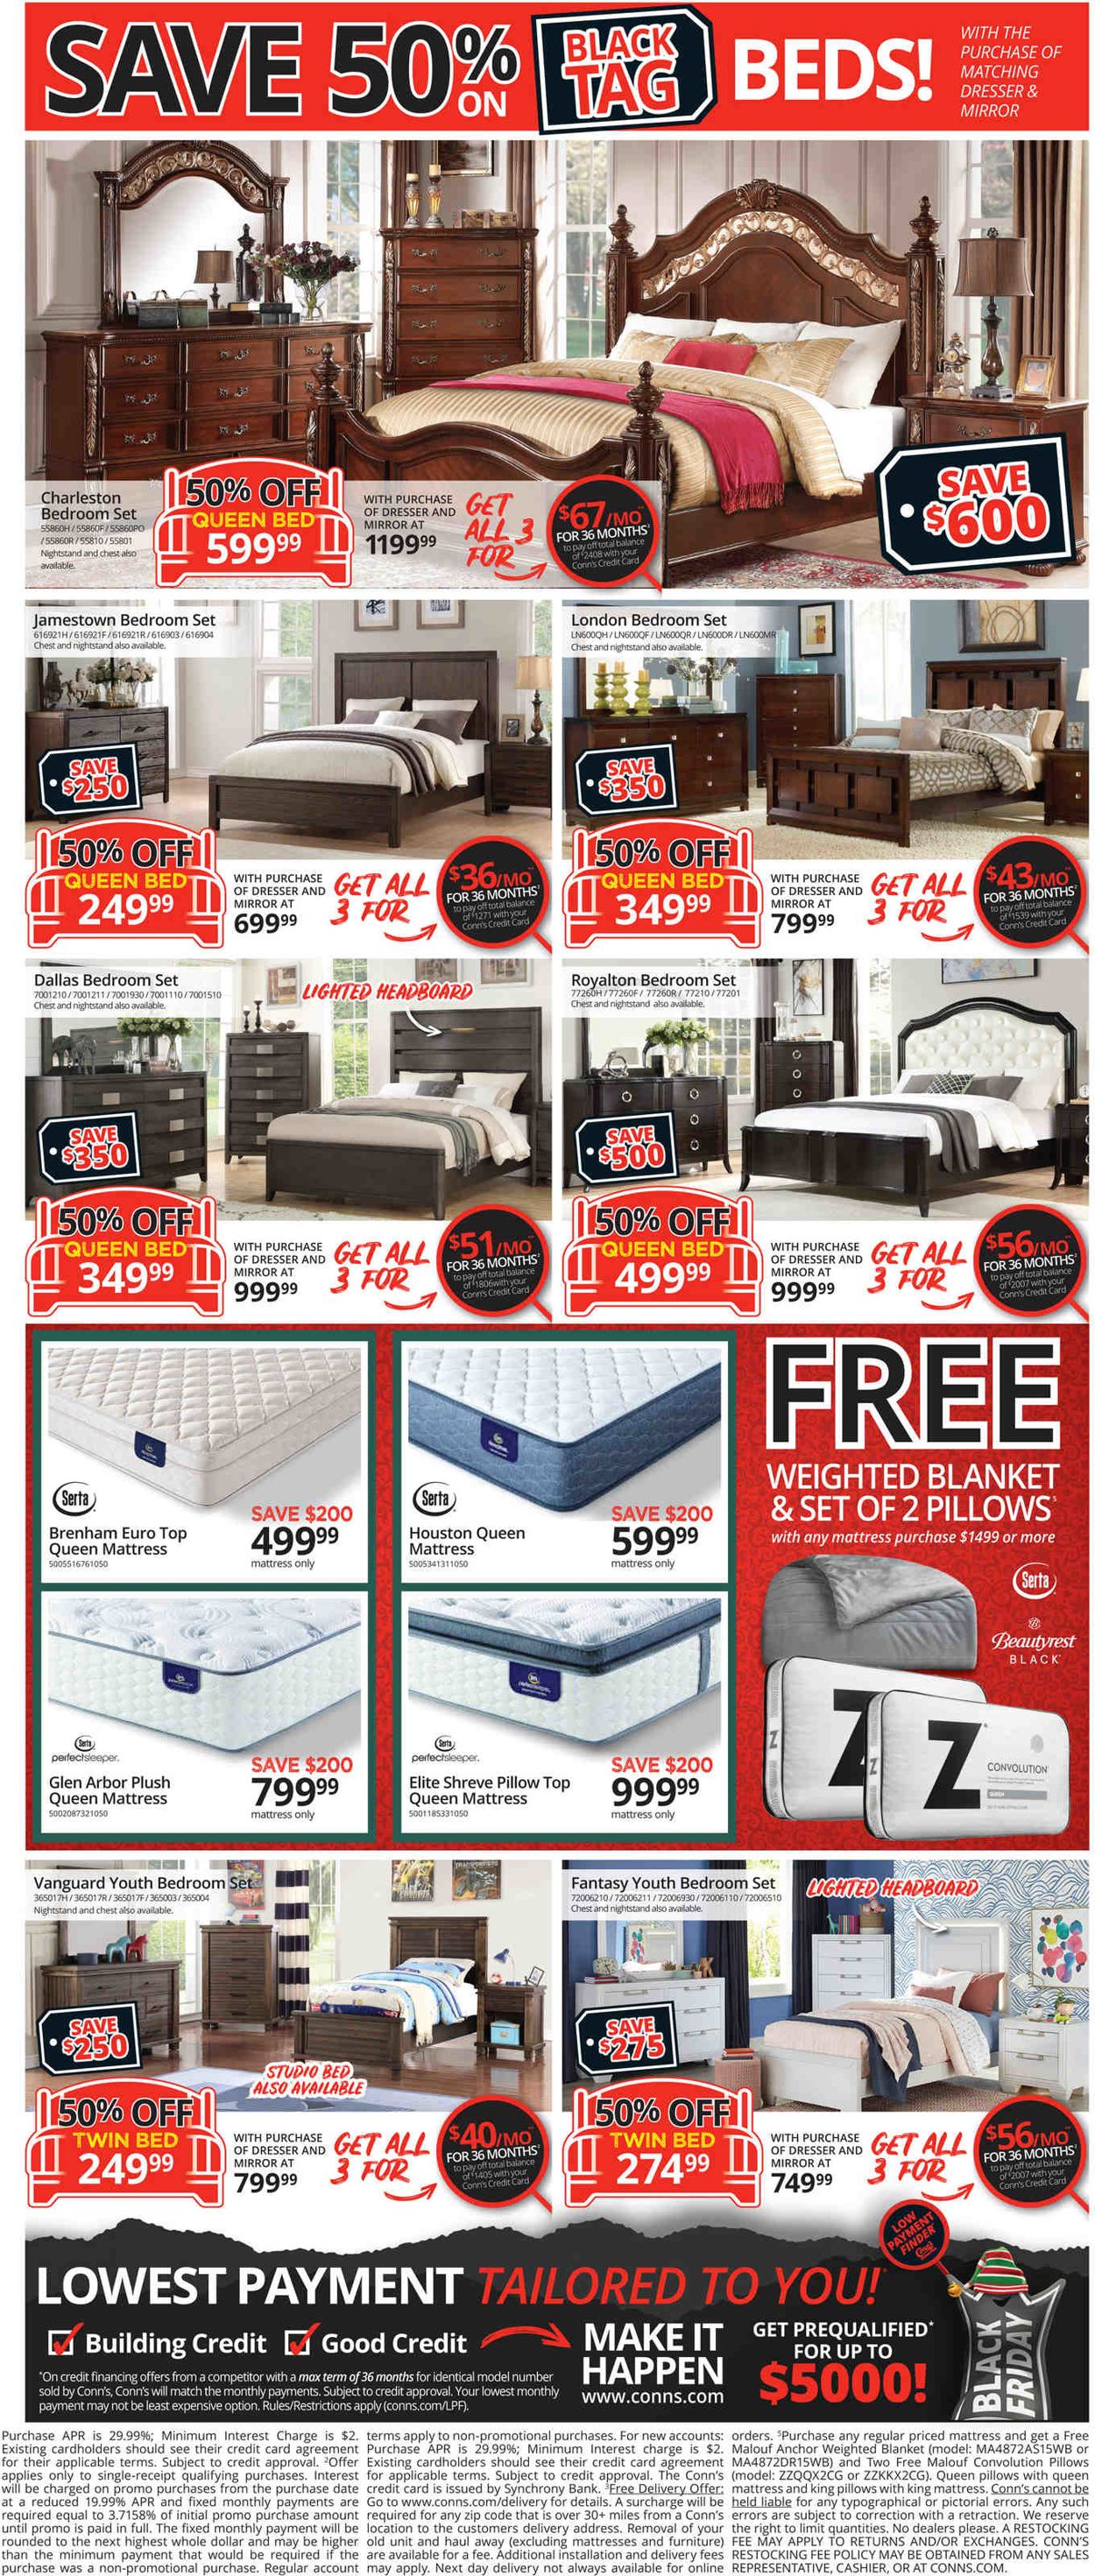 Conn's Home Plus Black Friday 2020 Weekly Ad Circular - valid 11/01-11/04/2020 (Page 3)